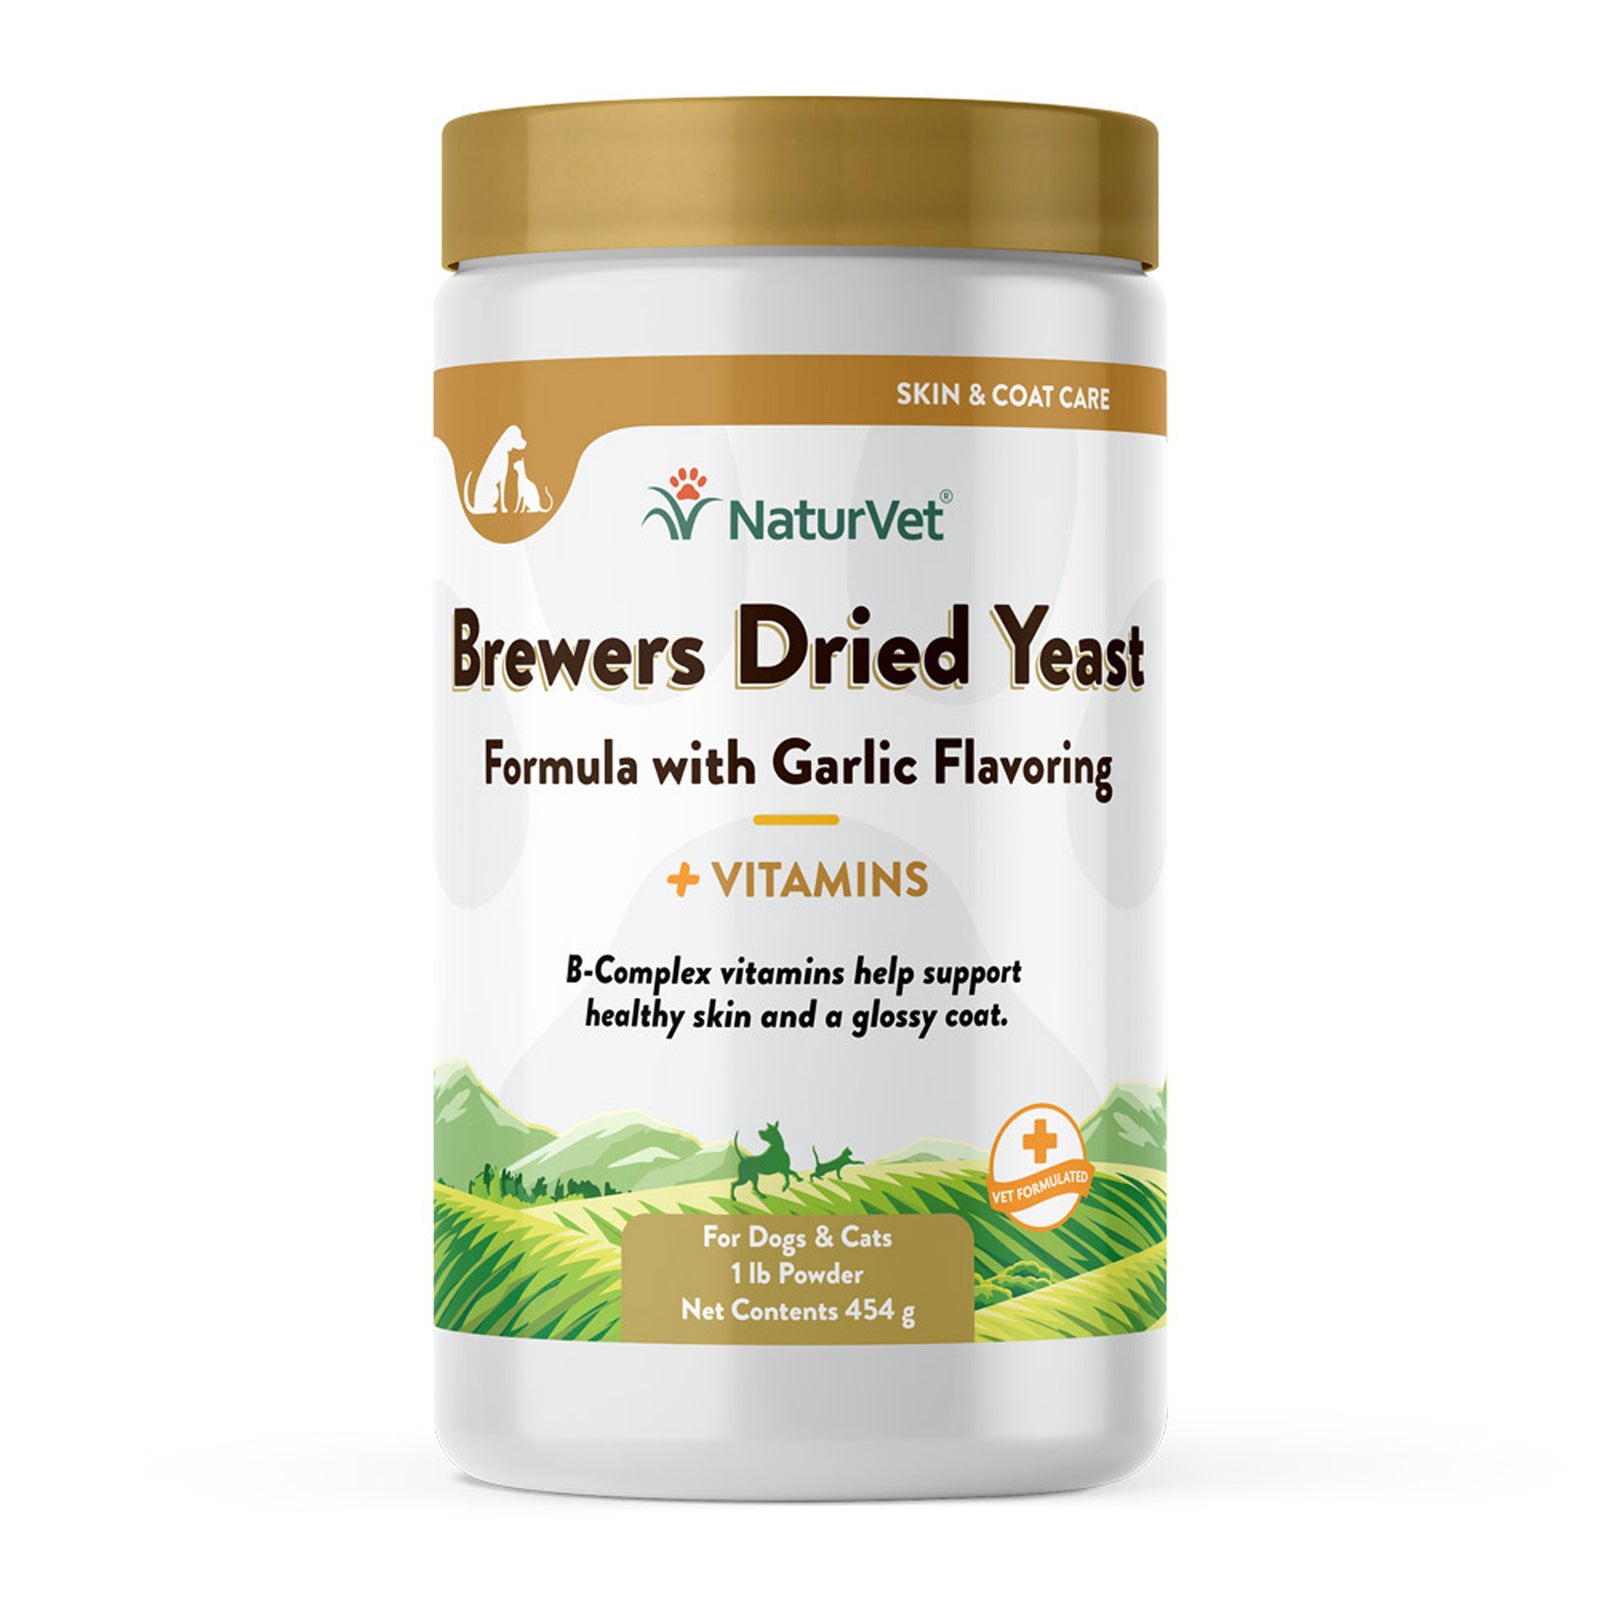 NaturVet Brewers Dried Yeast Formula Plus Vitamins for Dogs and Cats, Powder